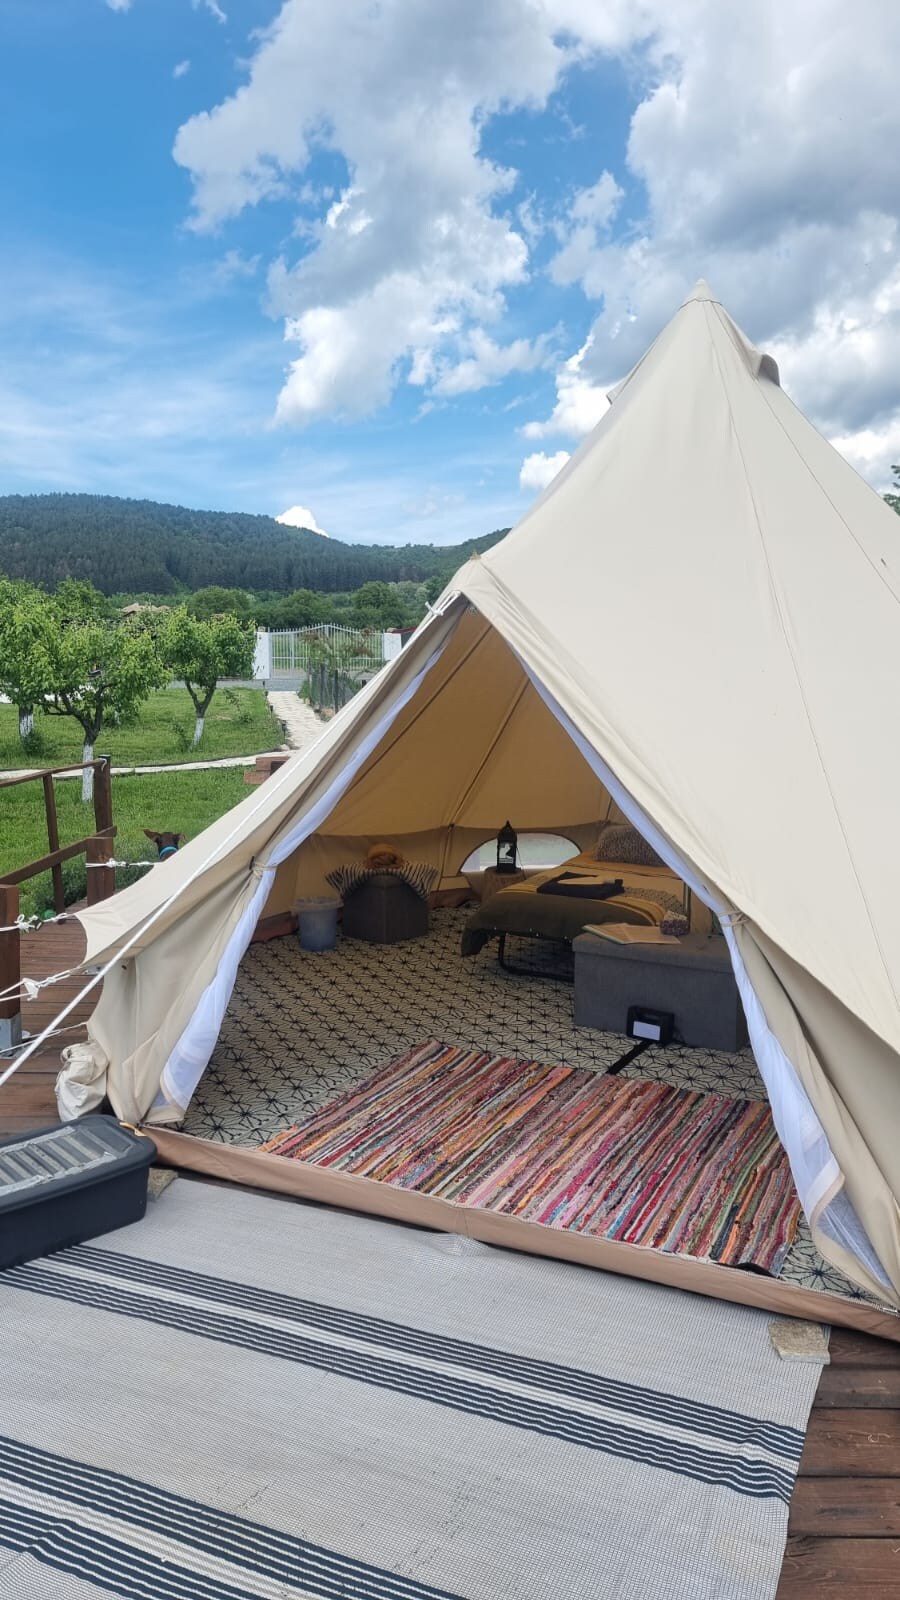 Calla Retreat - Glamping in style! 
Pete's Pad